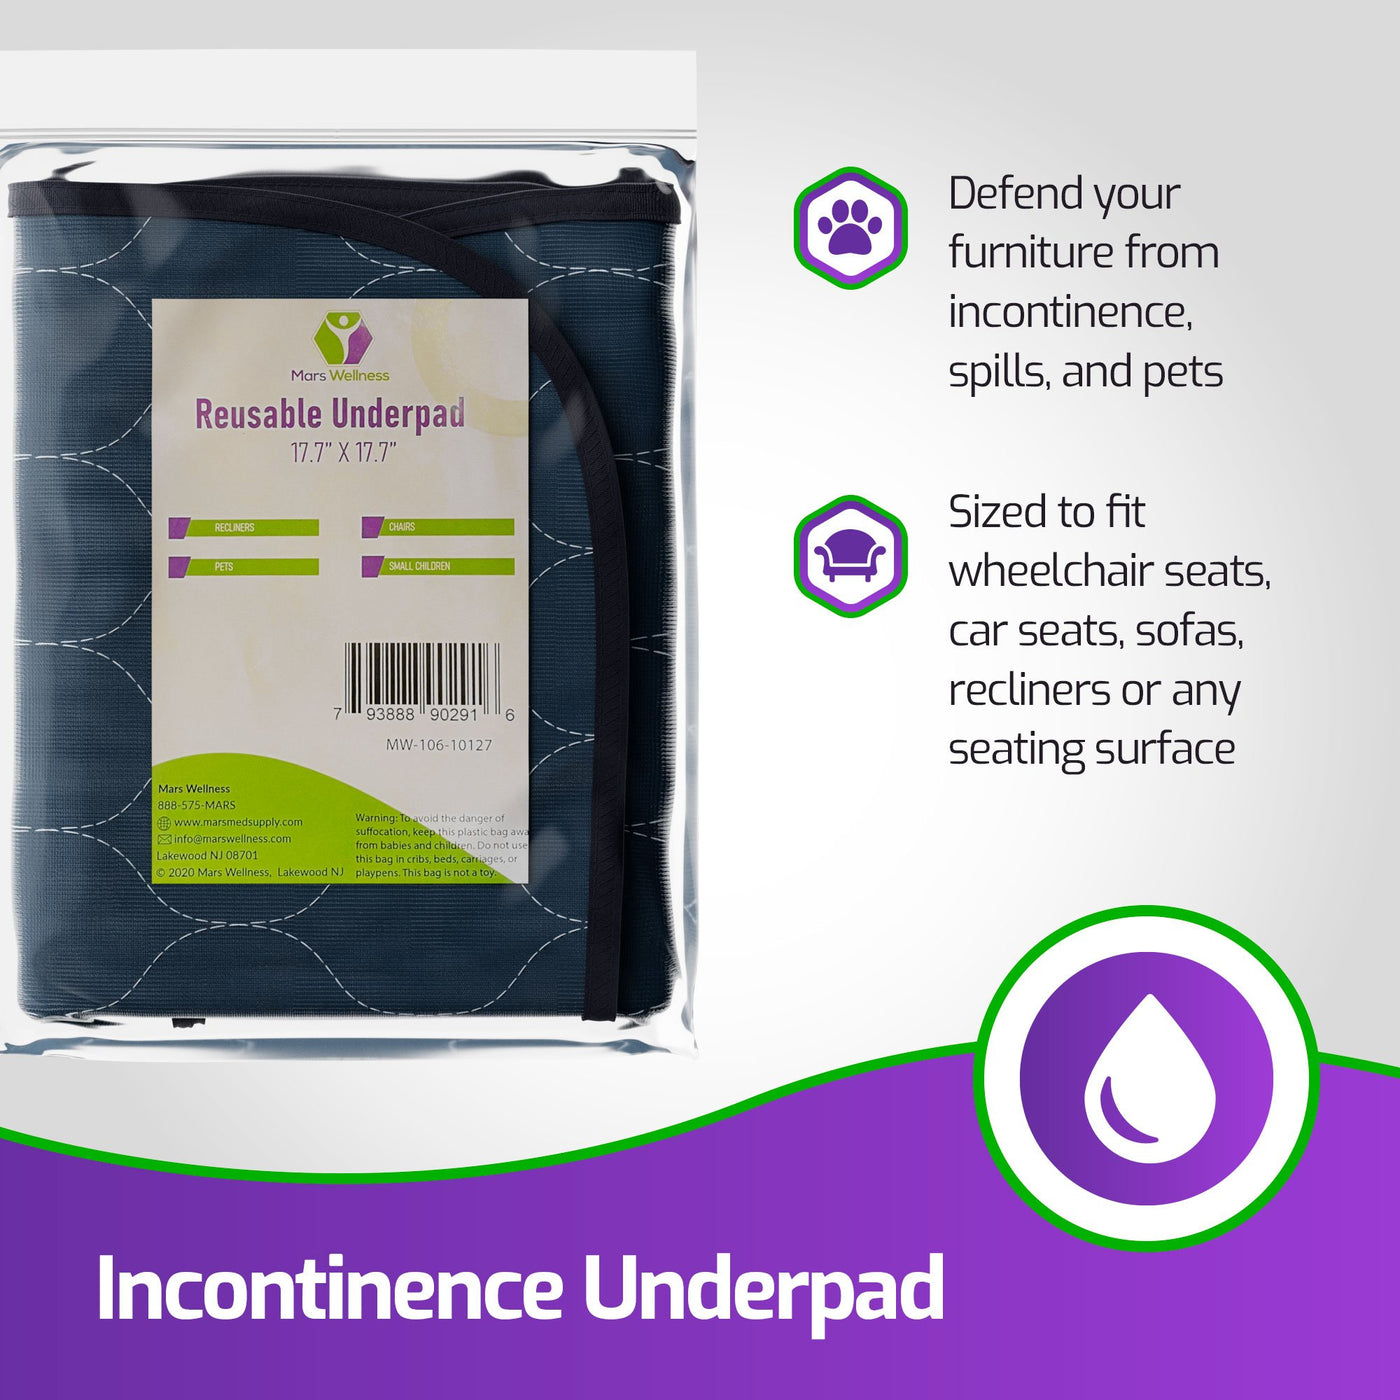 CareActive Quilted Waterproof Incontinence Seat Pad : protects